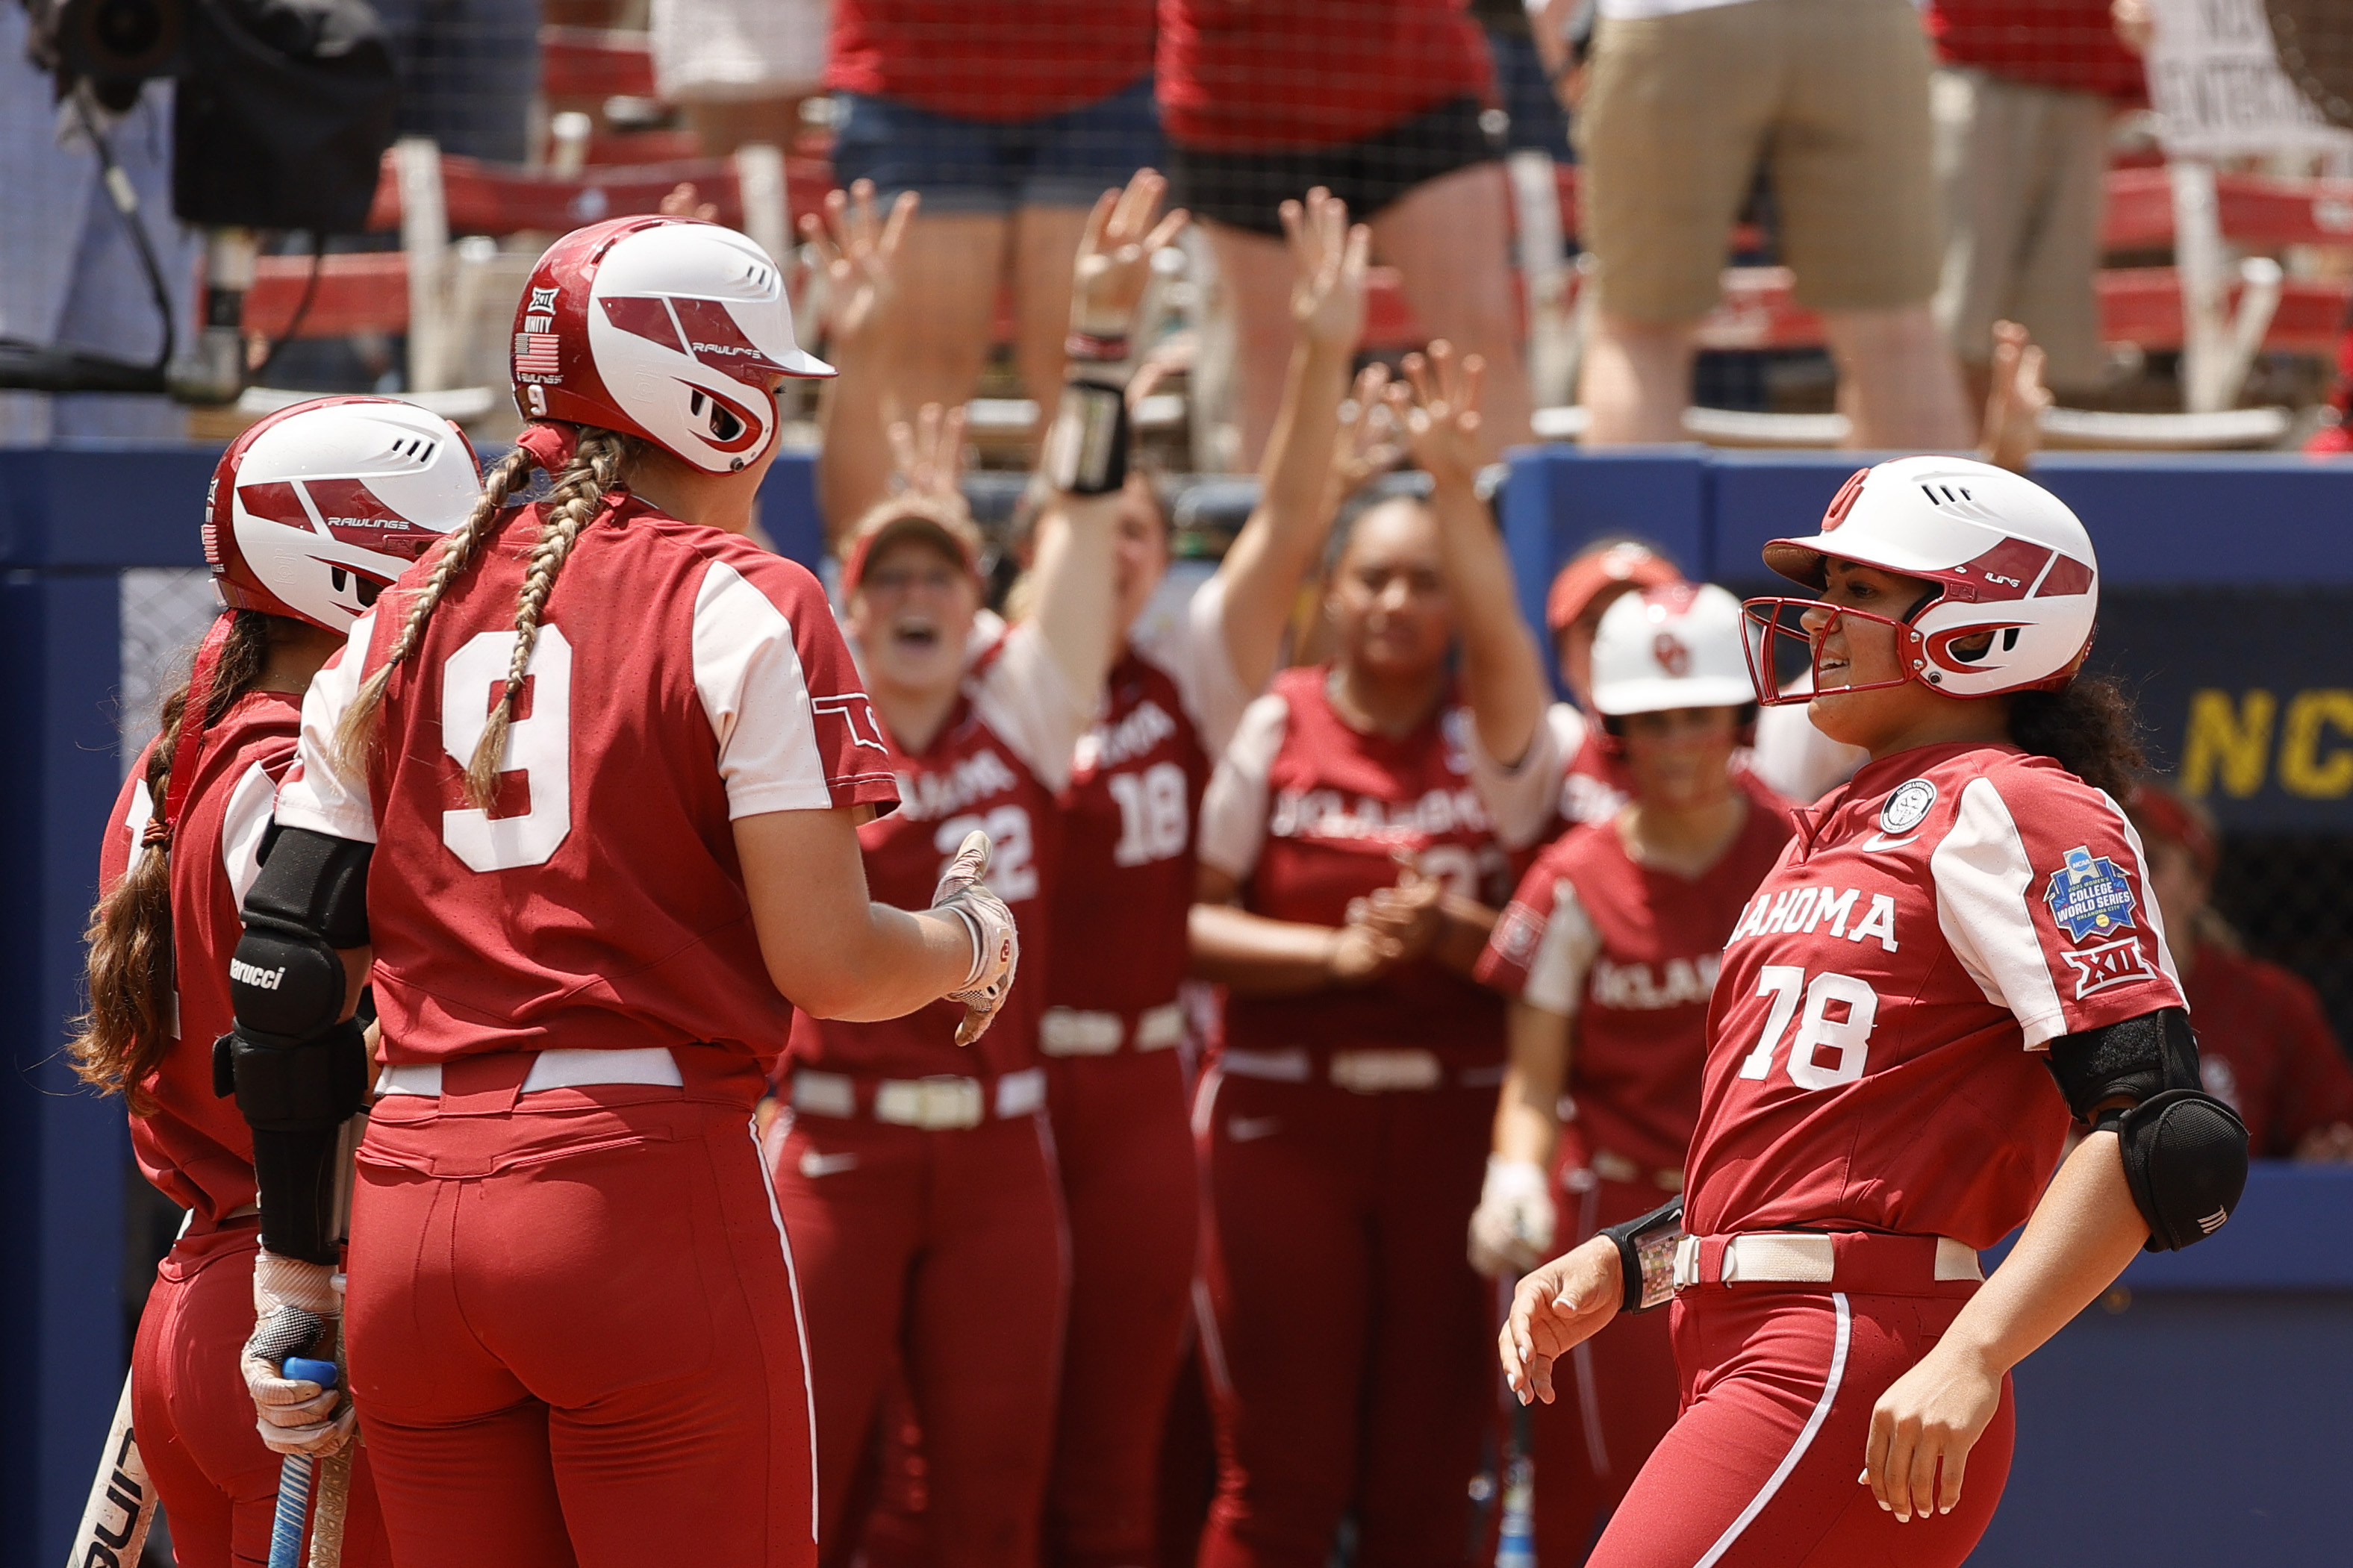 Jocelyn Alo of the Oklahoma Sooners reacts with teammates as she scores on a solo home run during the first inning of Game 3 of the Women’s College World Series Championship against the Florida St. Seminoles at USA Softball Hall of Fame Stadium on June 10, 2021 in Oklahoma City, Oklahoma.